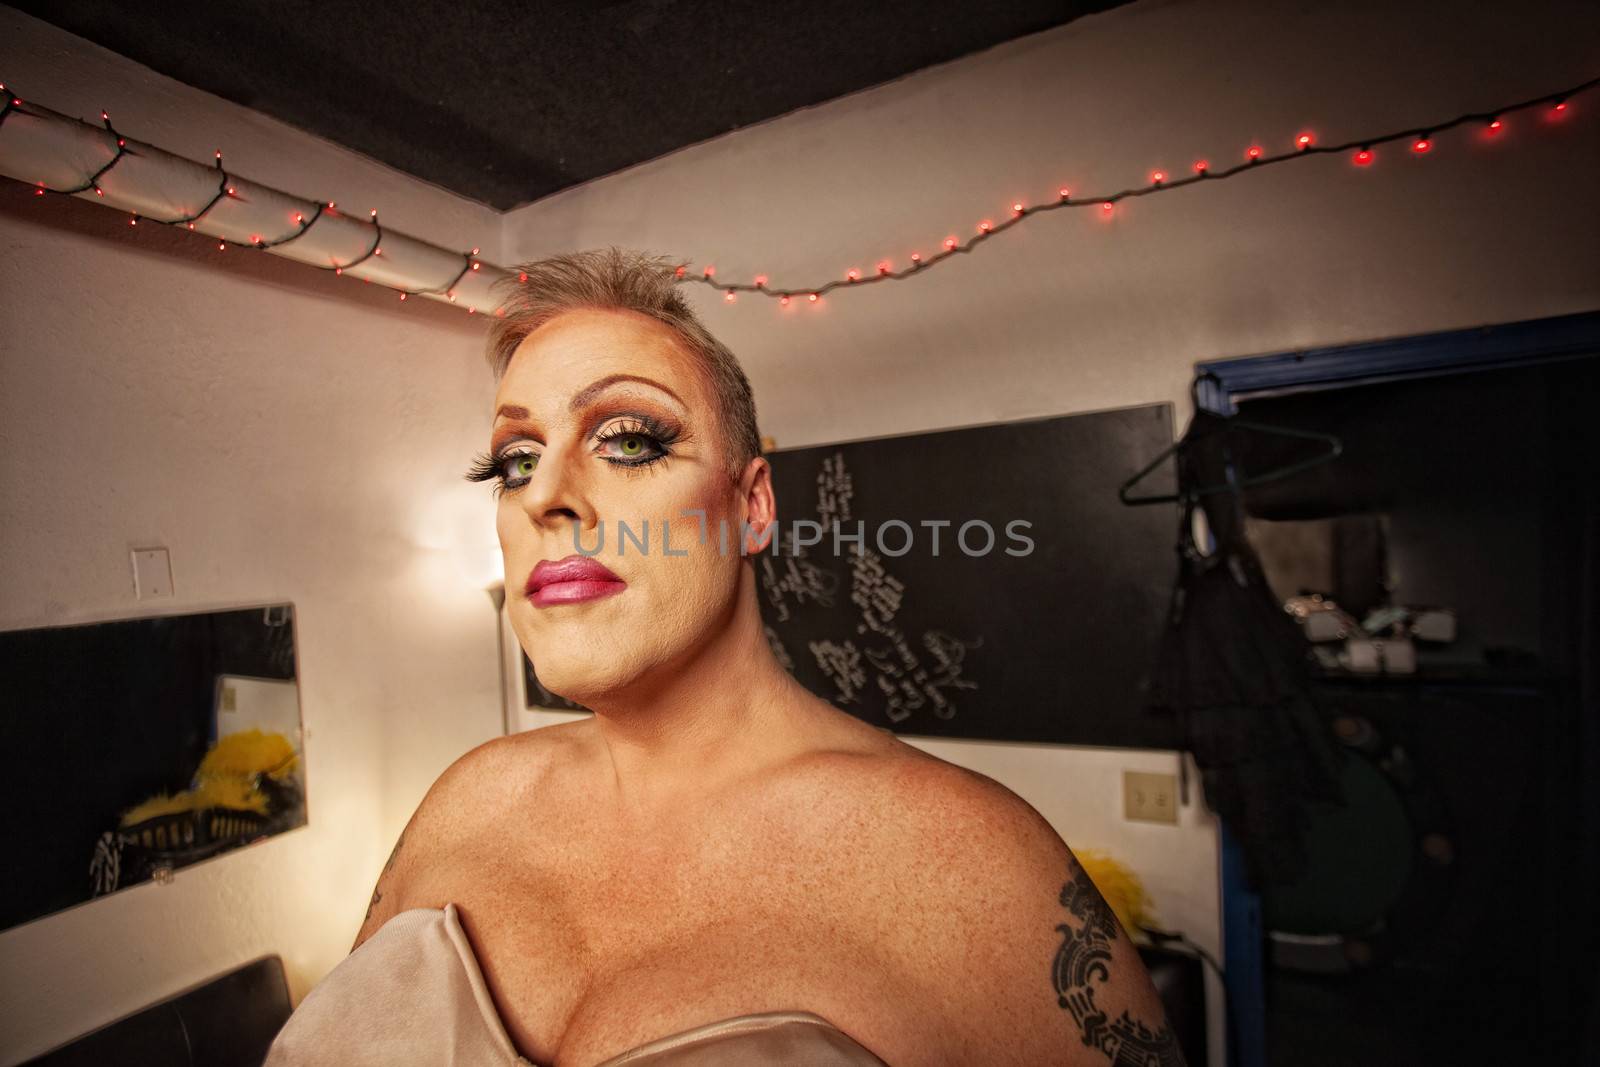 Serious drag queen with bra and tattoo in dressing room